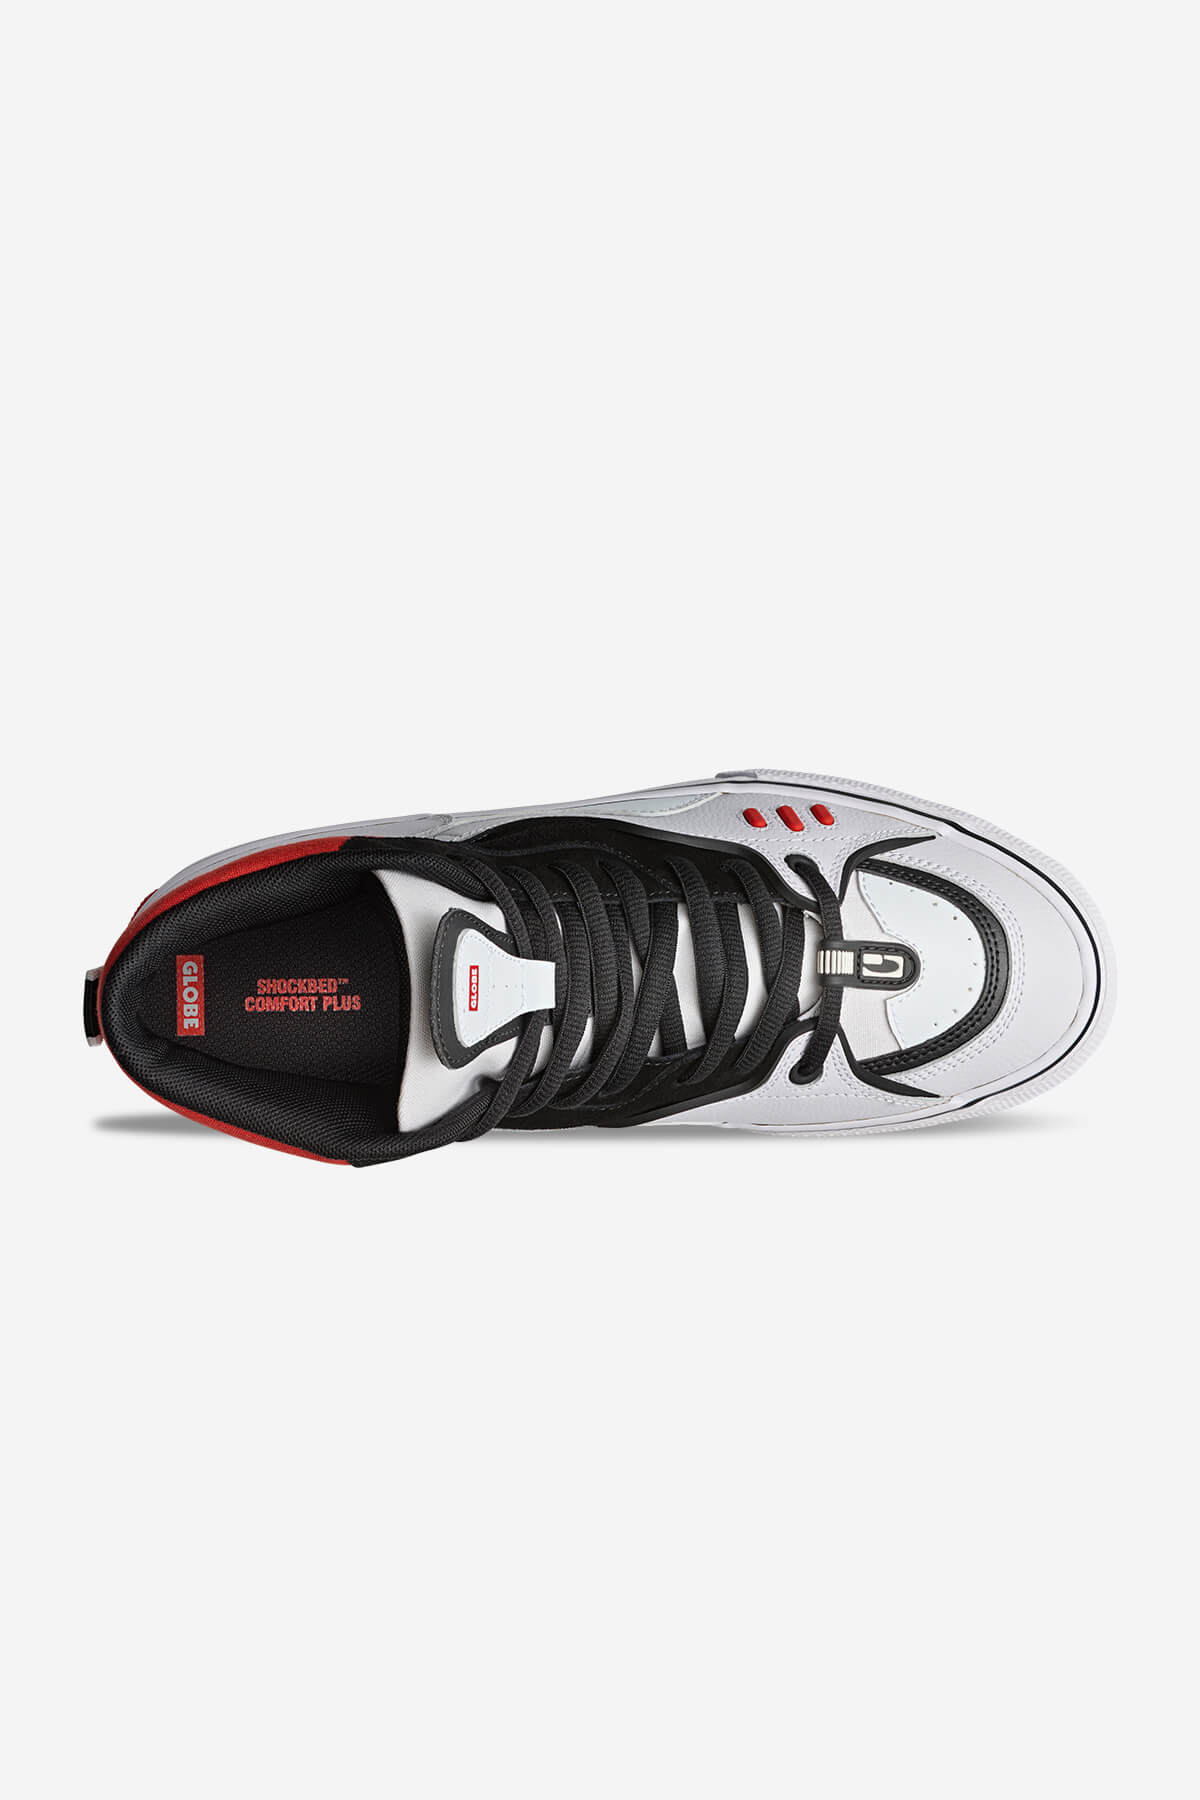 Globe Mid shoes Dimension - White/Black/Red in White/Black/Red